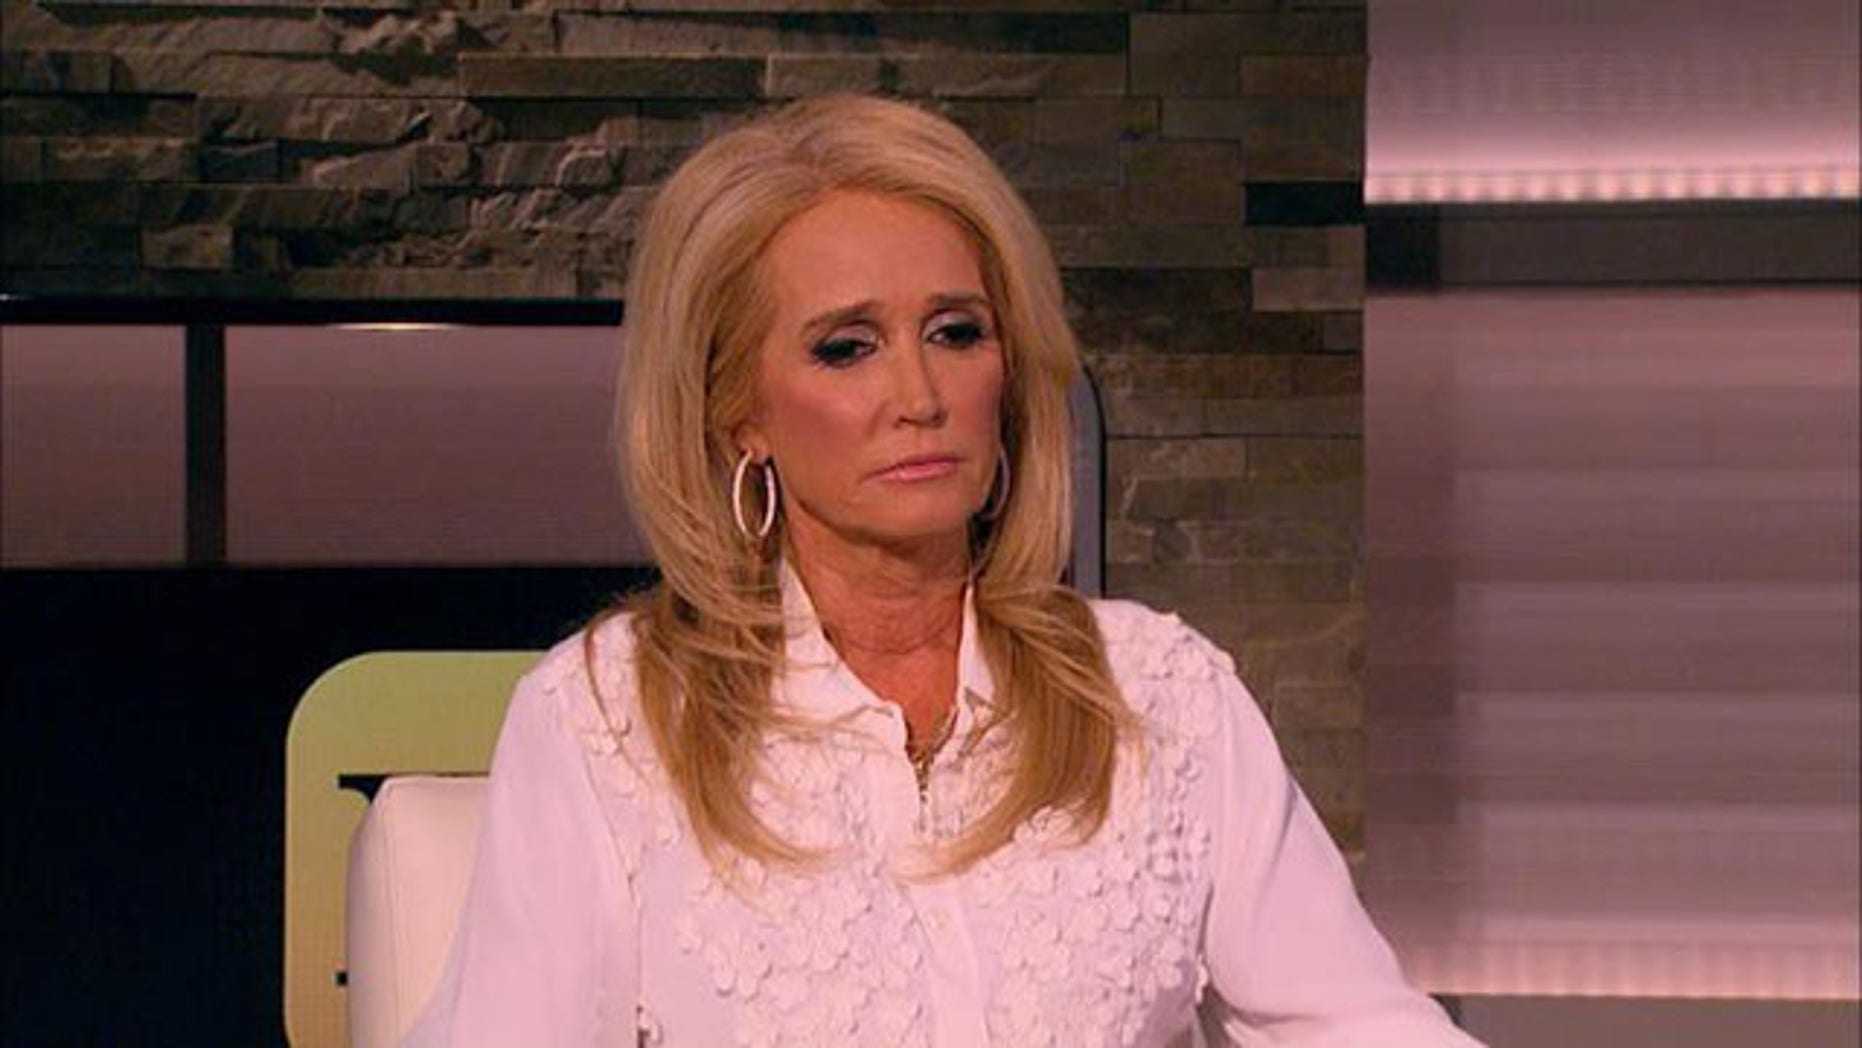 Kim Richards says she's sober, producers want her back on 'Real